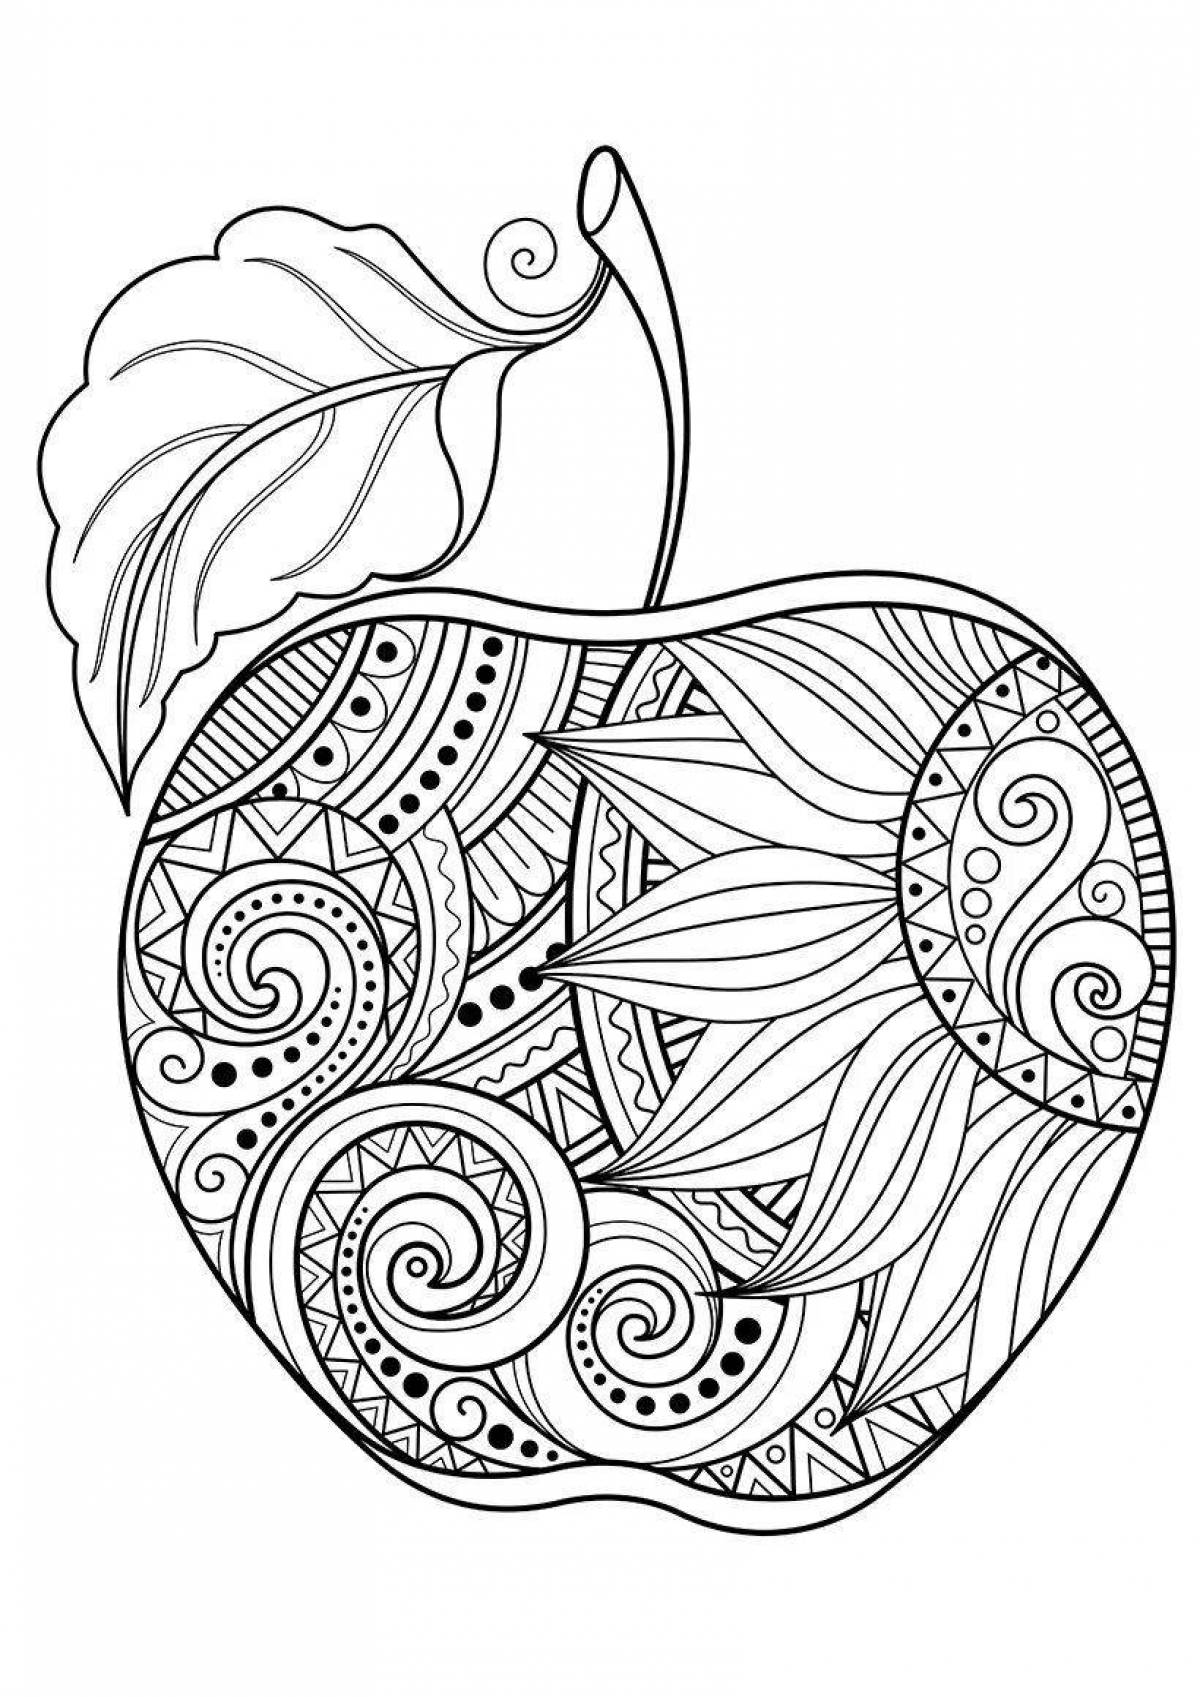 Colorful coloring art therapy for children with emotional problems